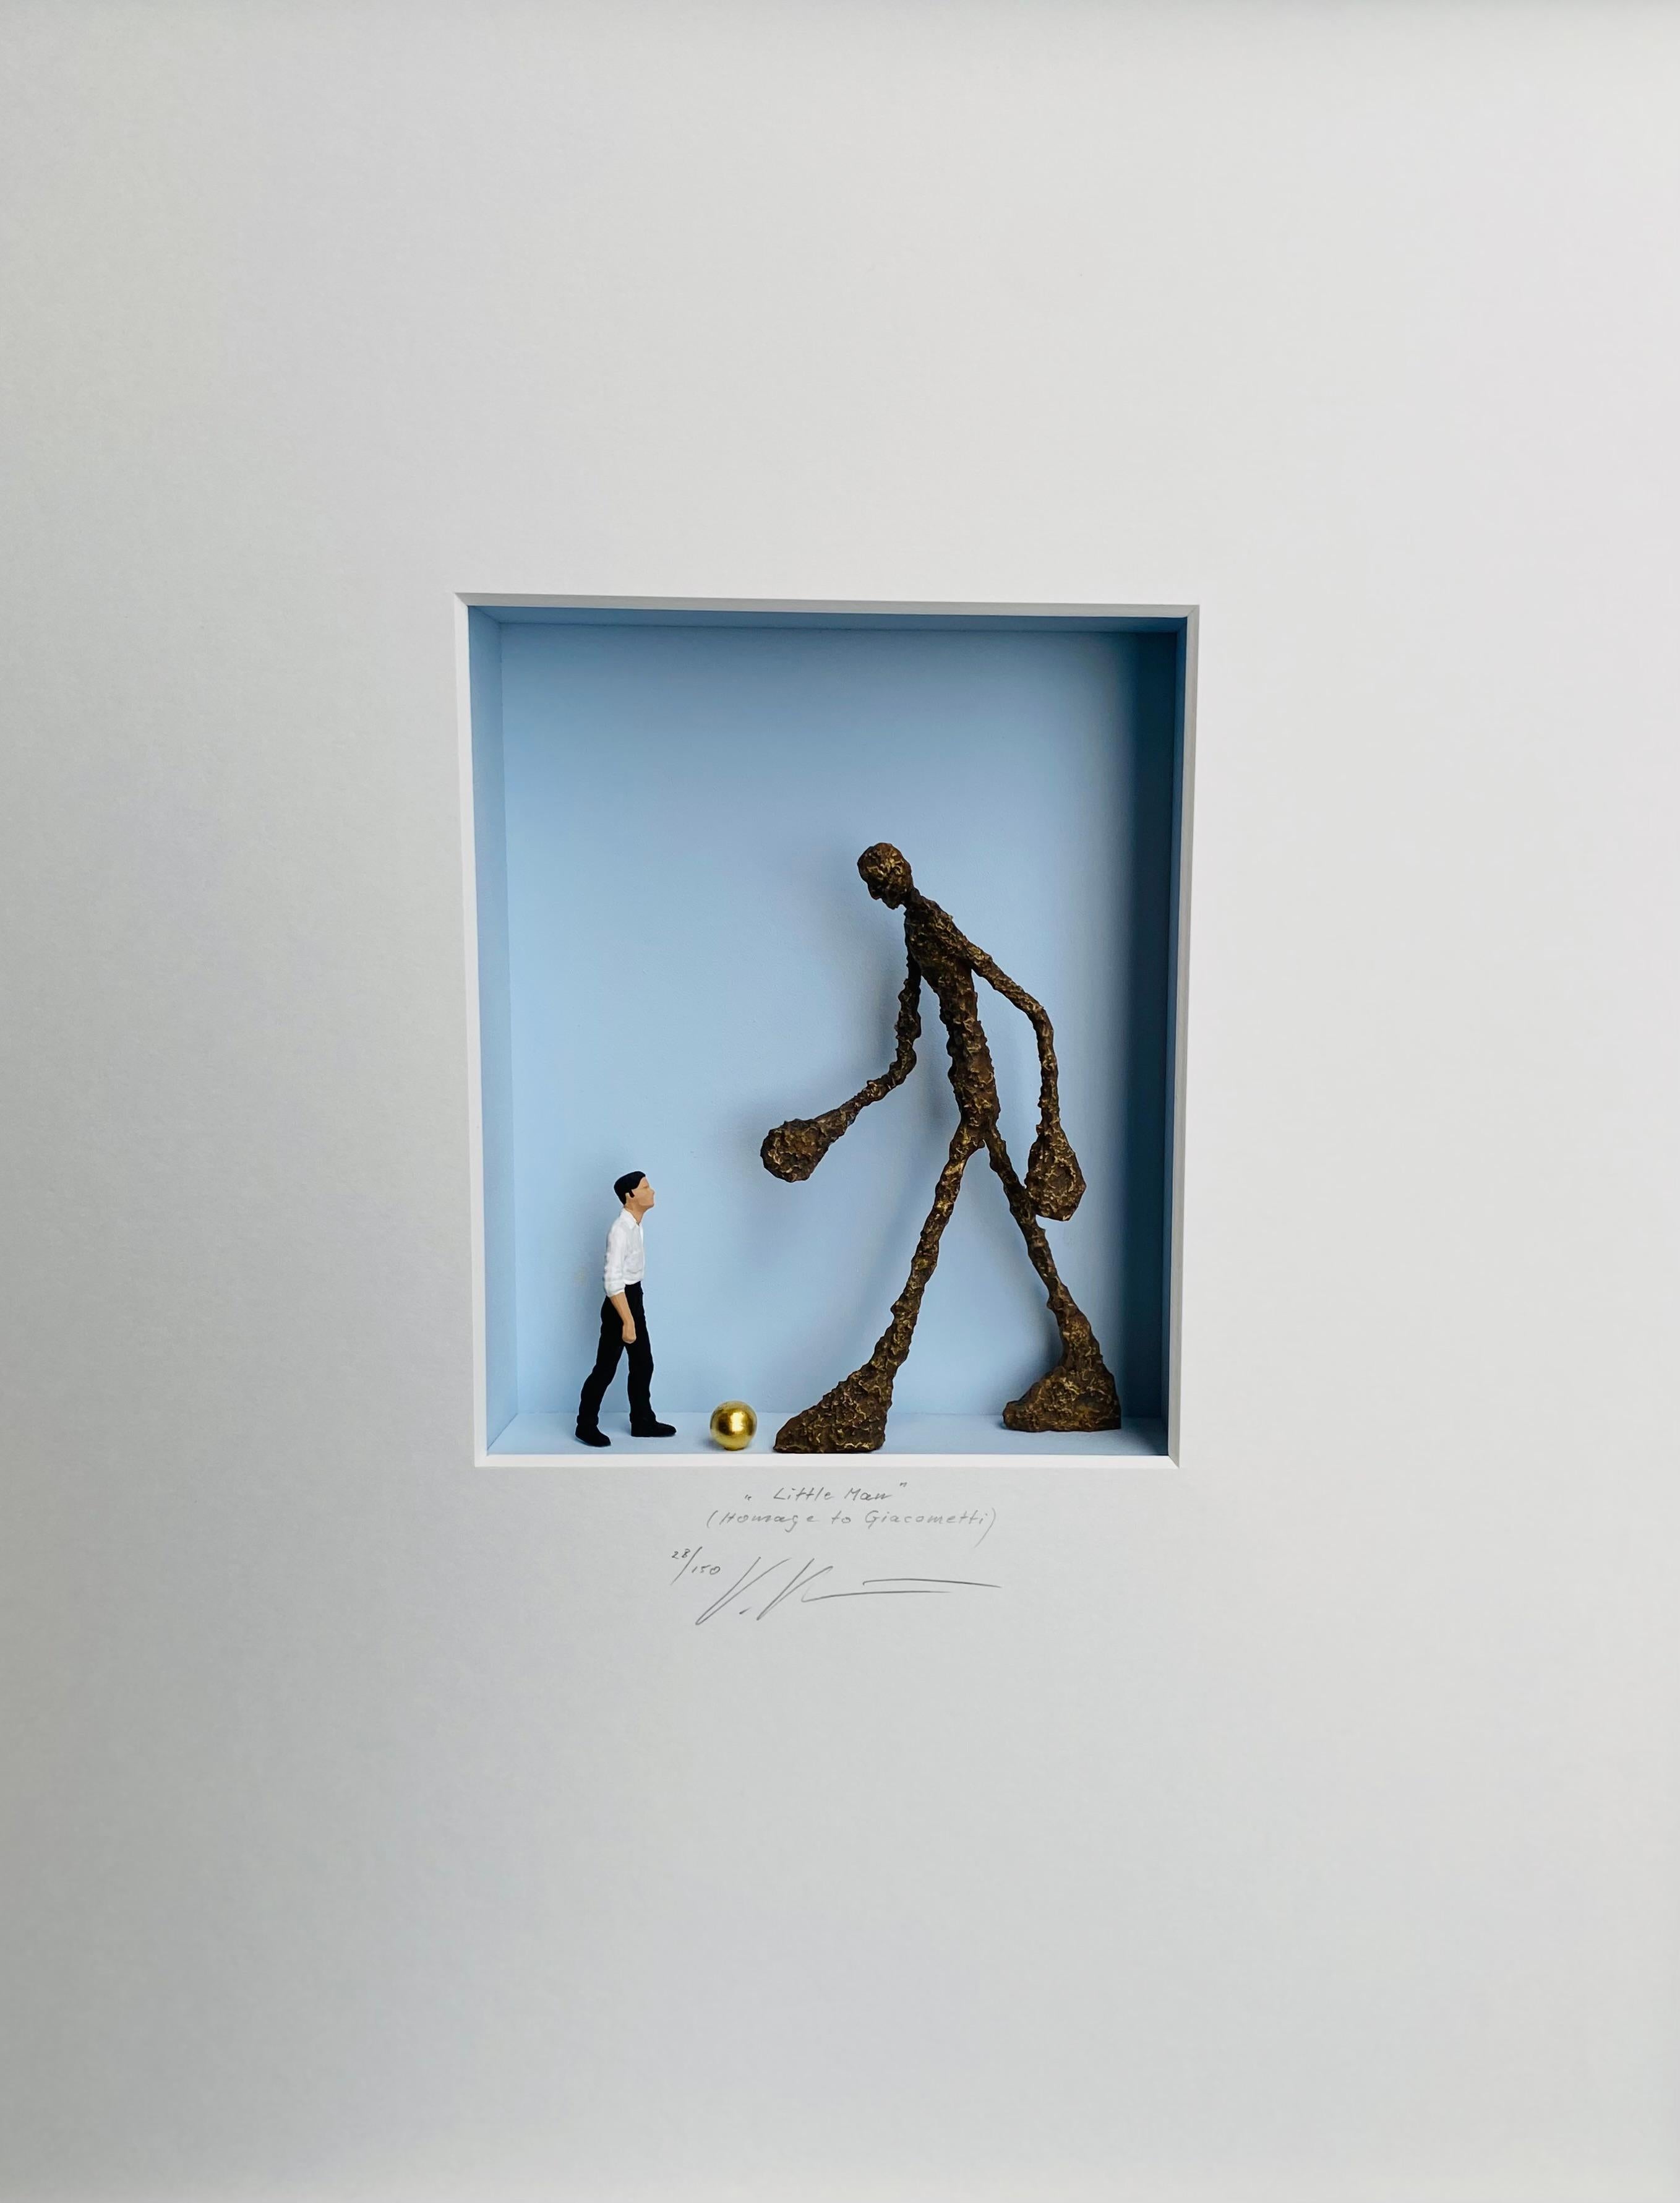 Little Man - Homage to Giacometti minimalist contemporary artwork by Volker Kuhn